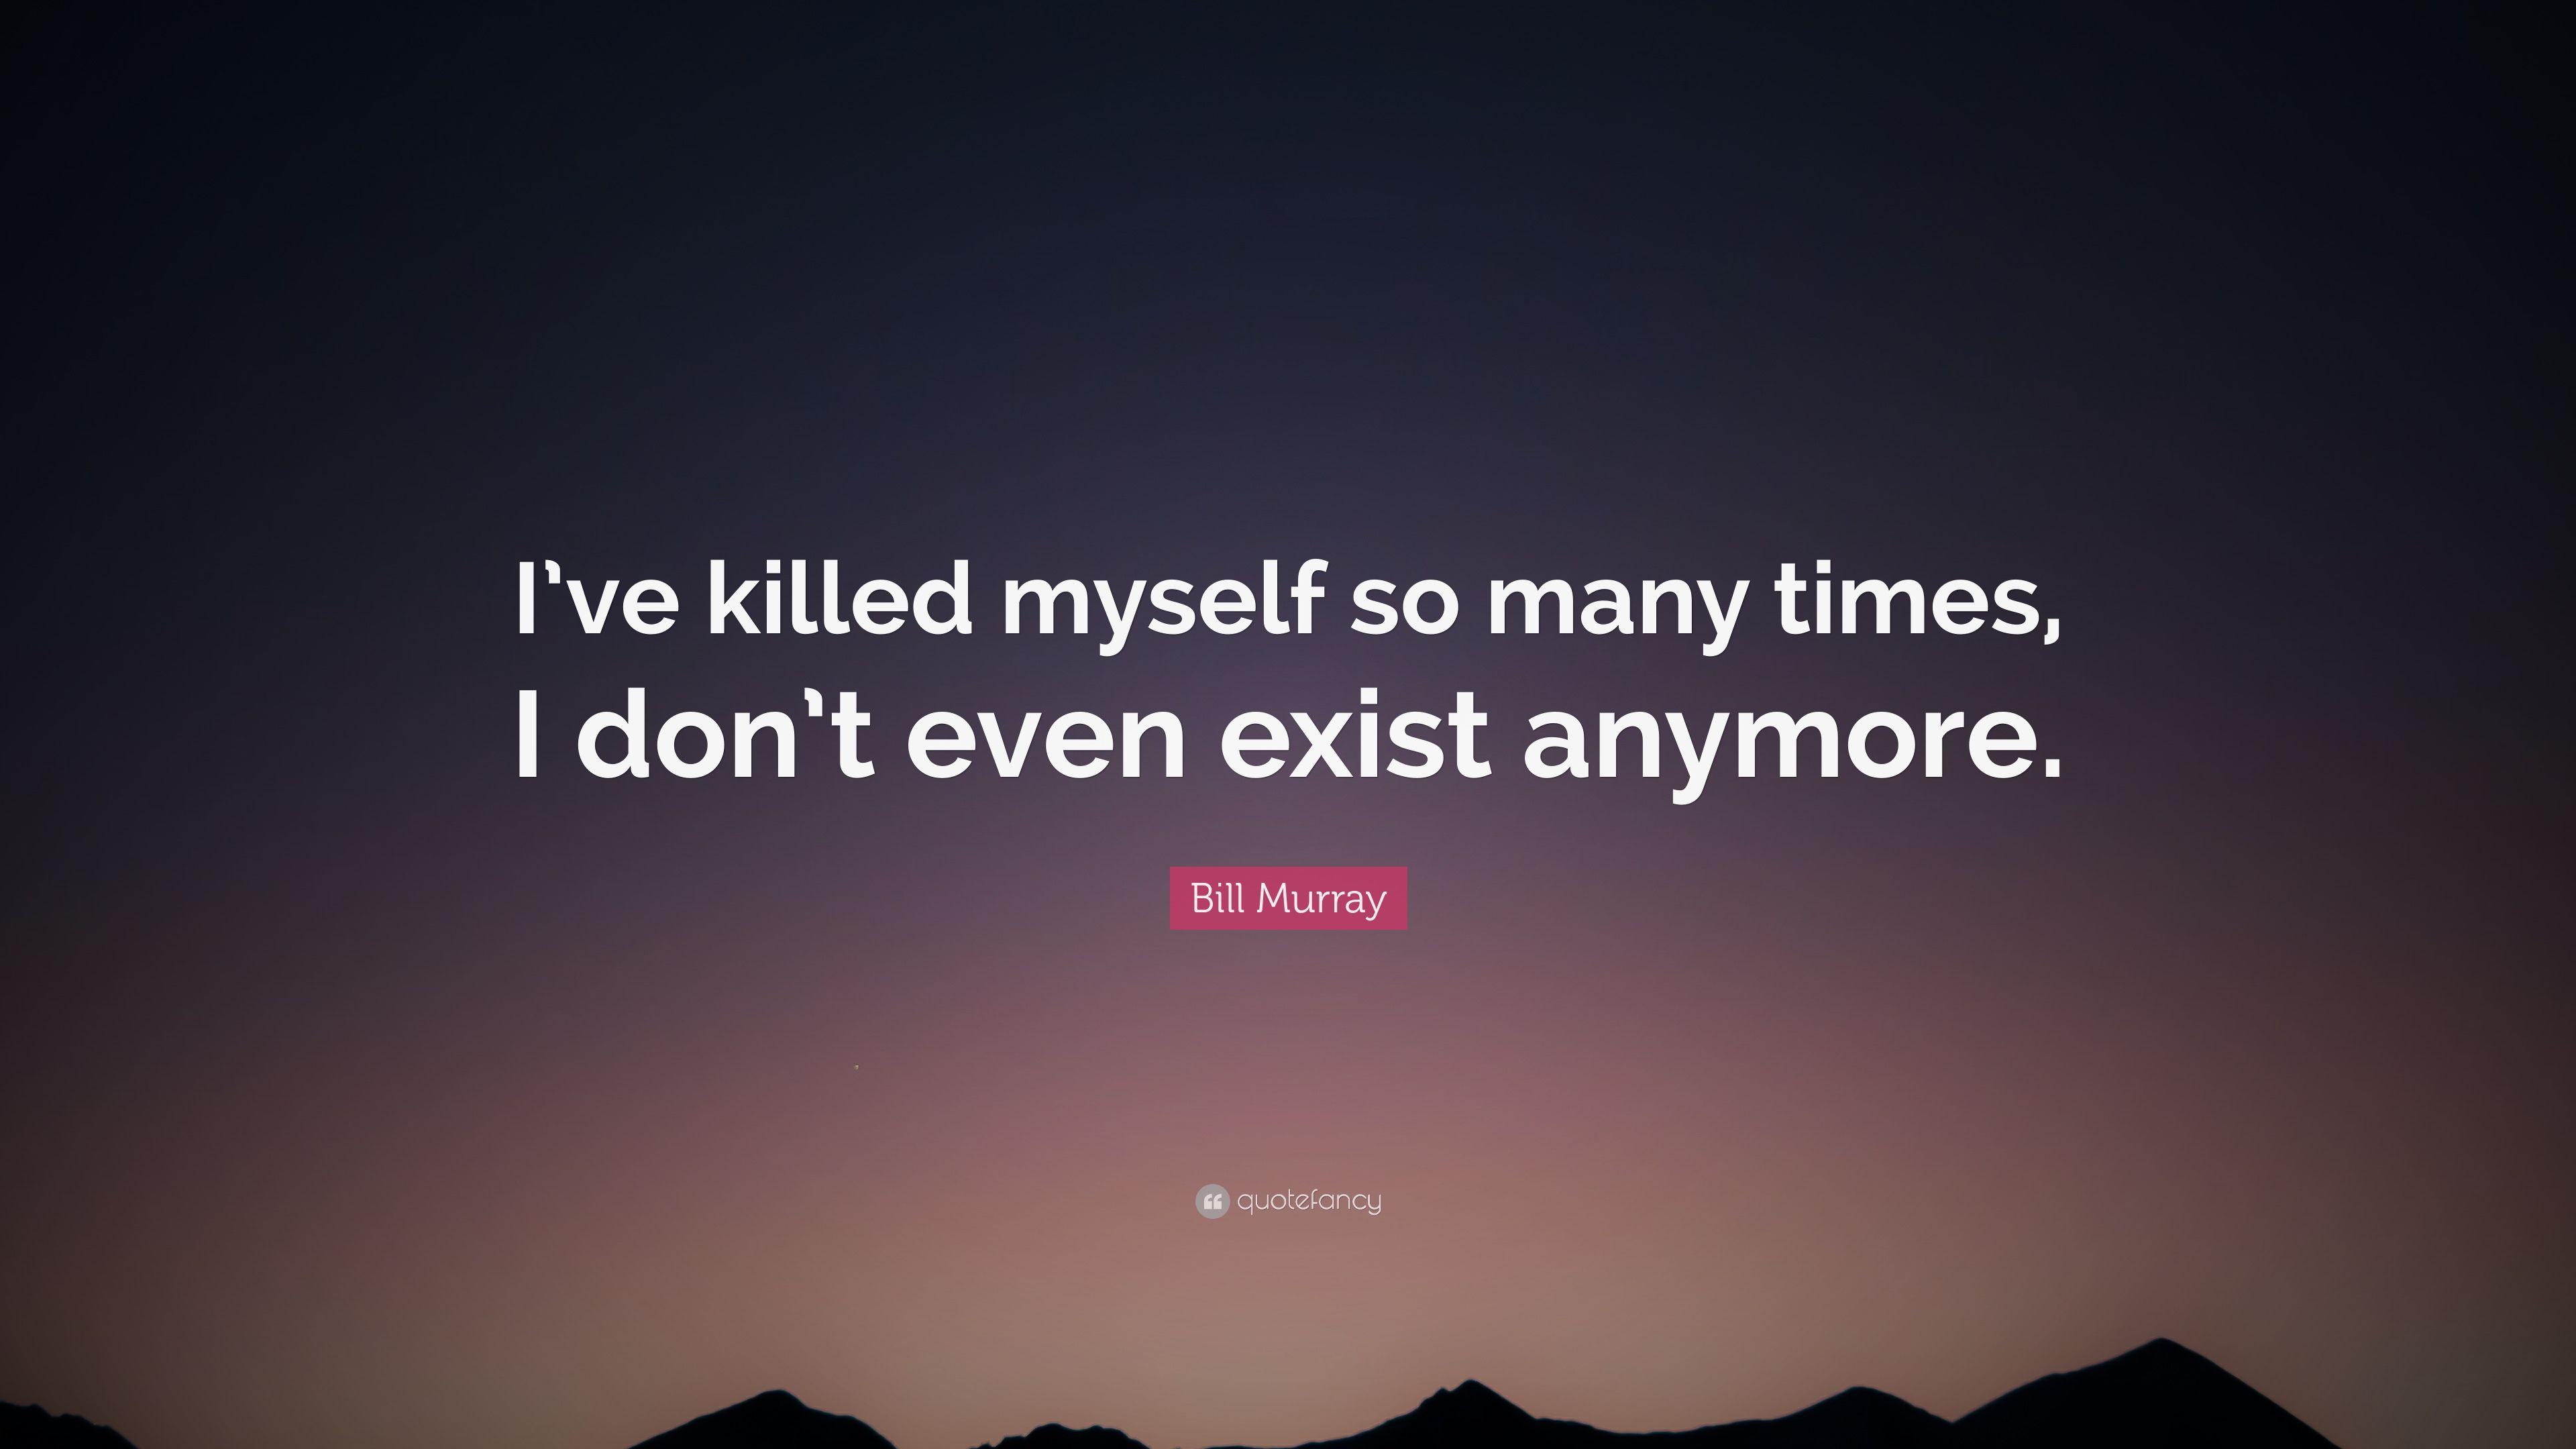 Bill Murray Quote: “I've killed myself so many times, I don't even